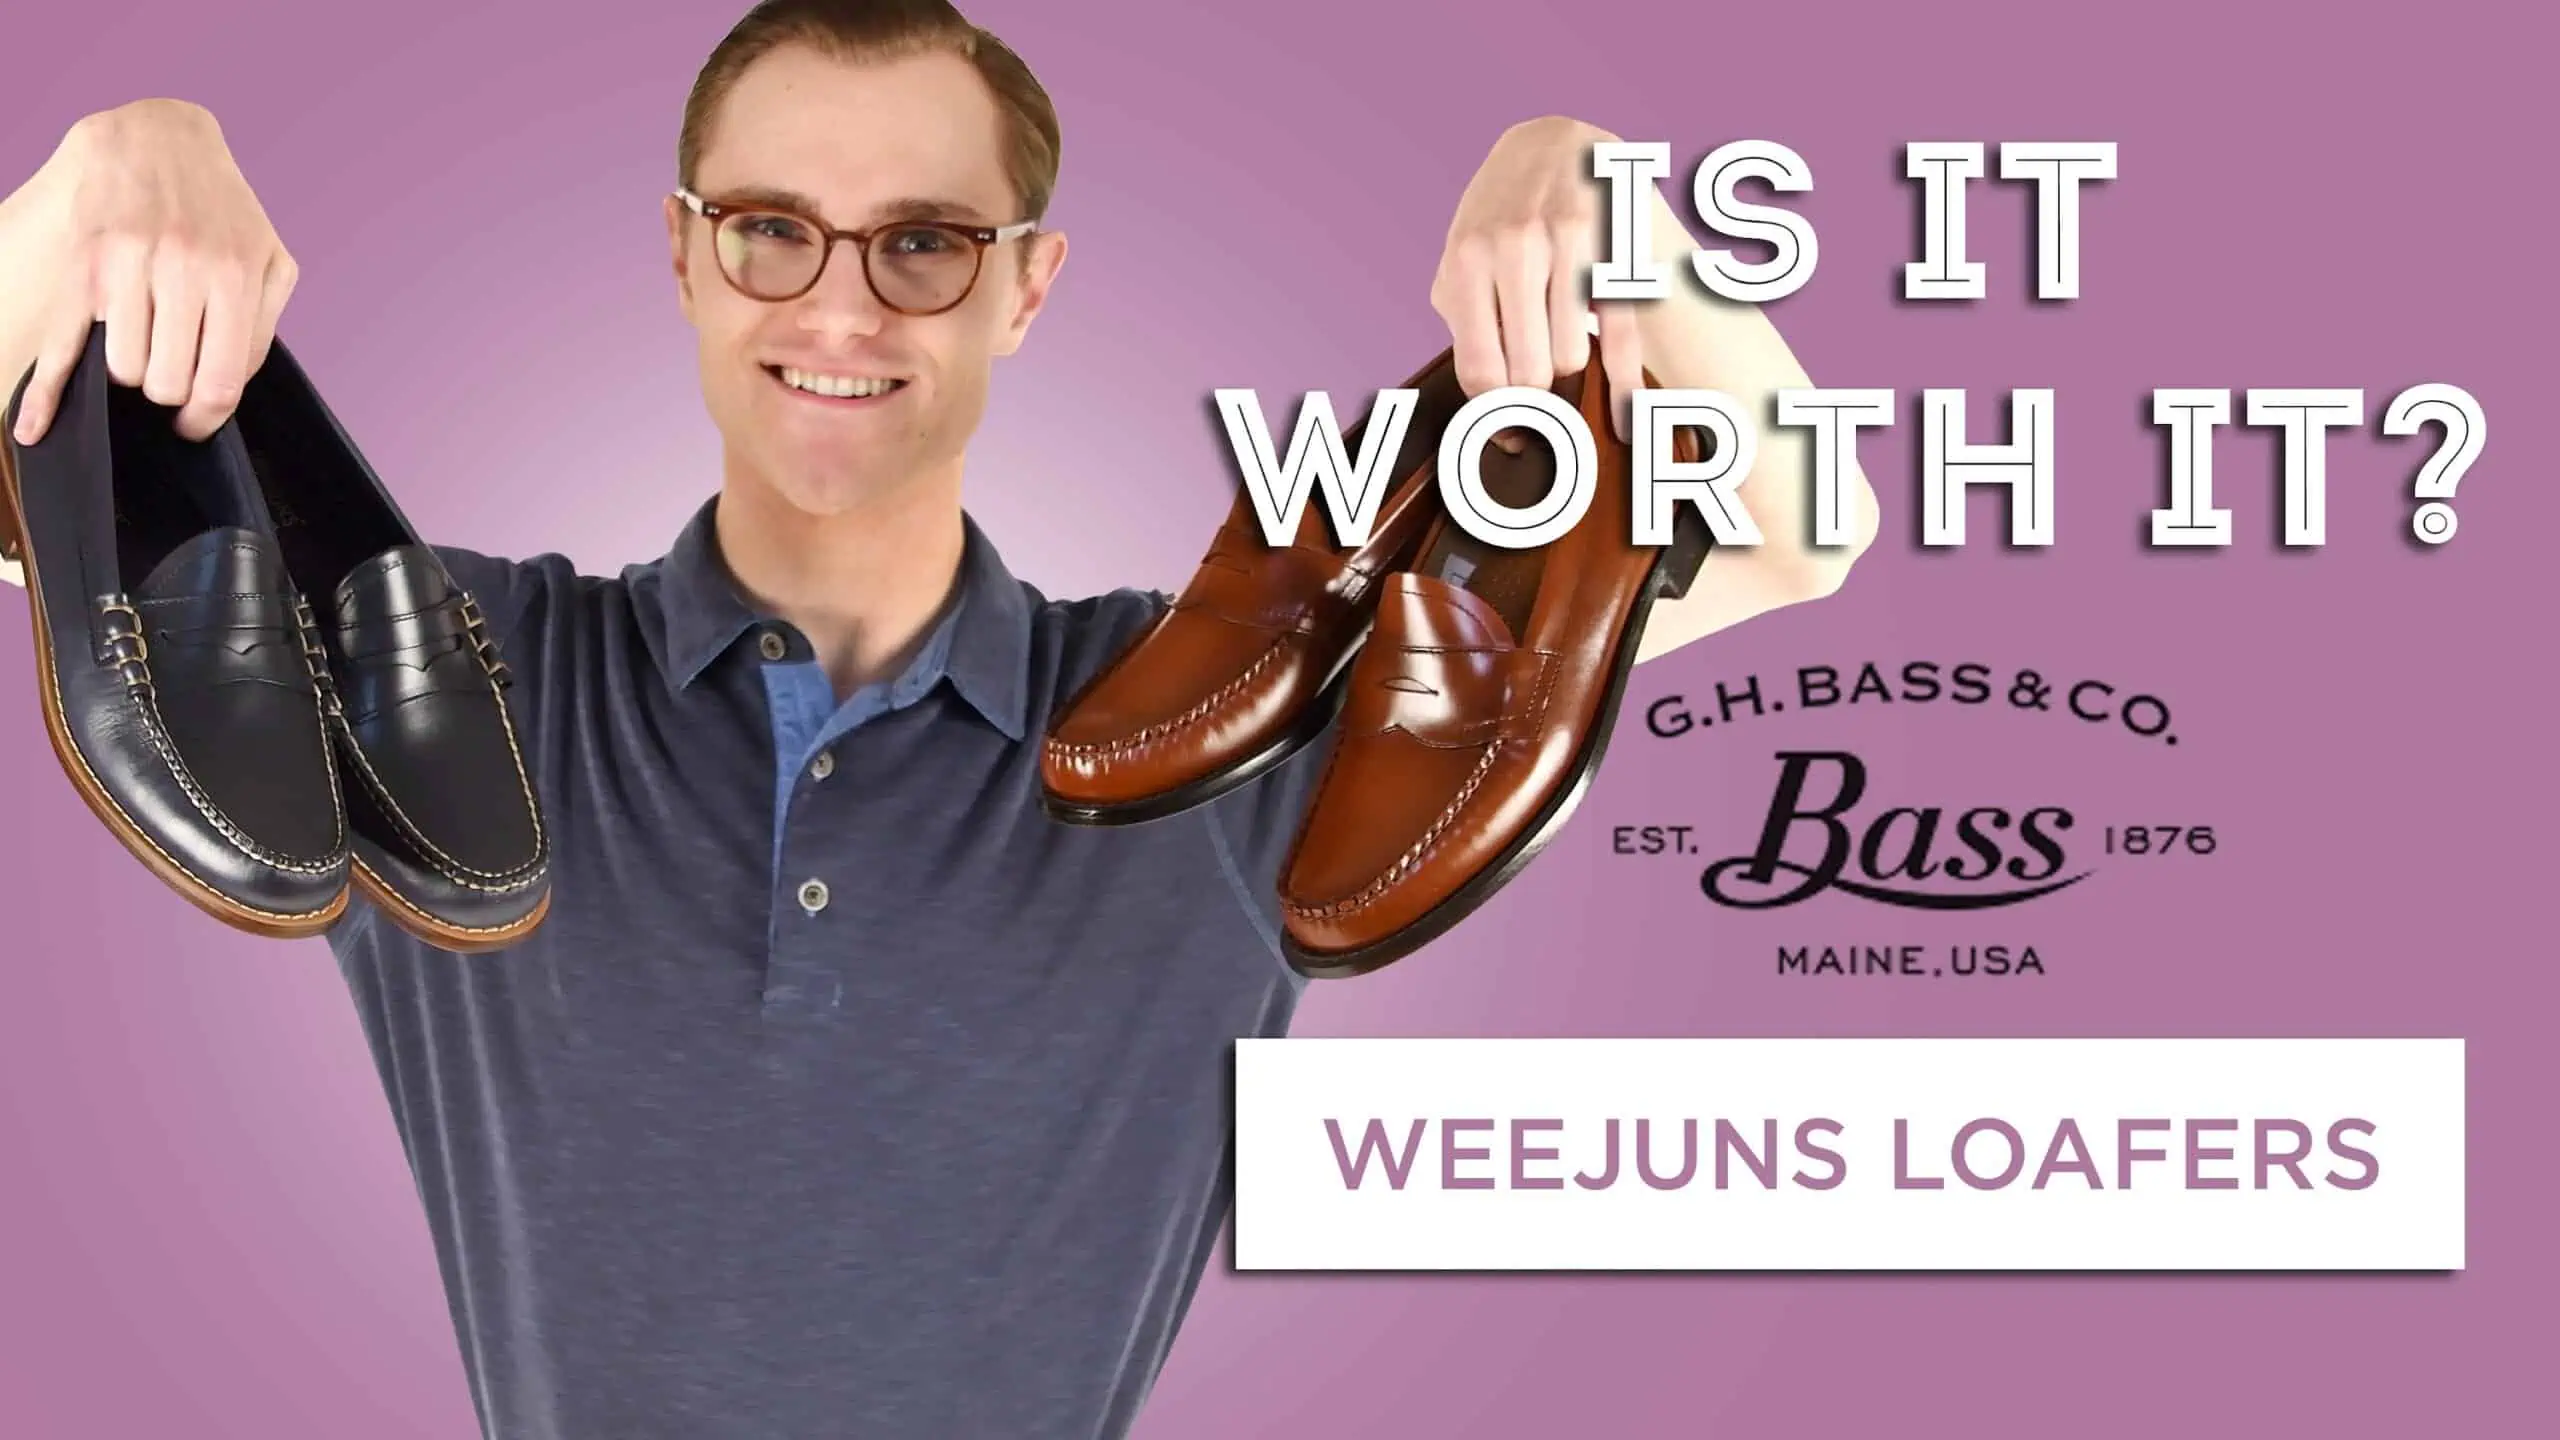 Bass "Weejuns" Loafers: It Worth It? - Trad Penny Loafer